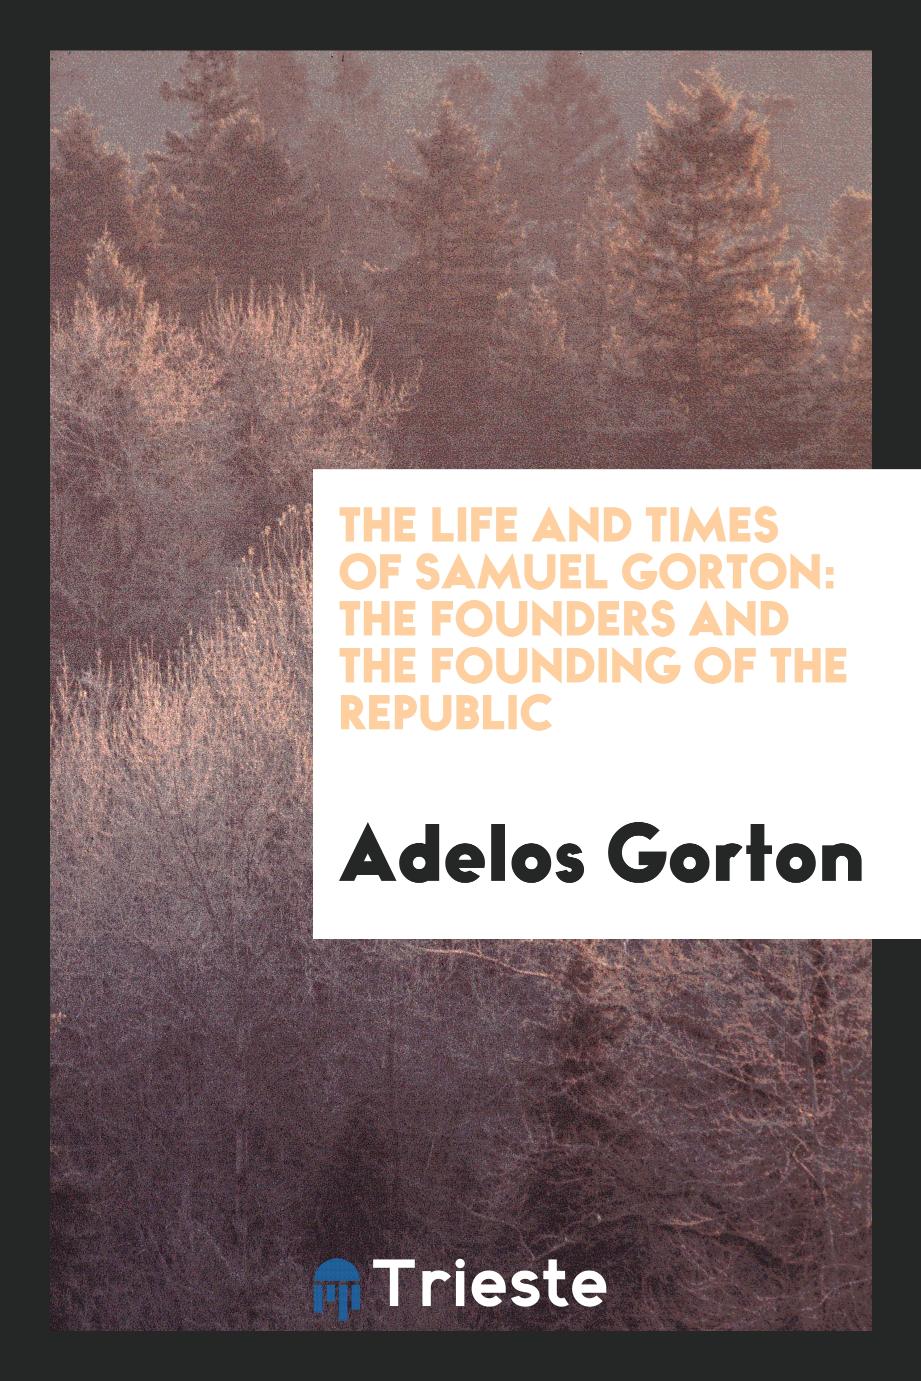 The Life and Times of Samuel Gorton: The Founders and the Founding of the Republic